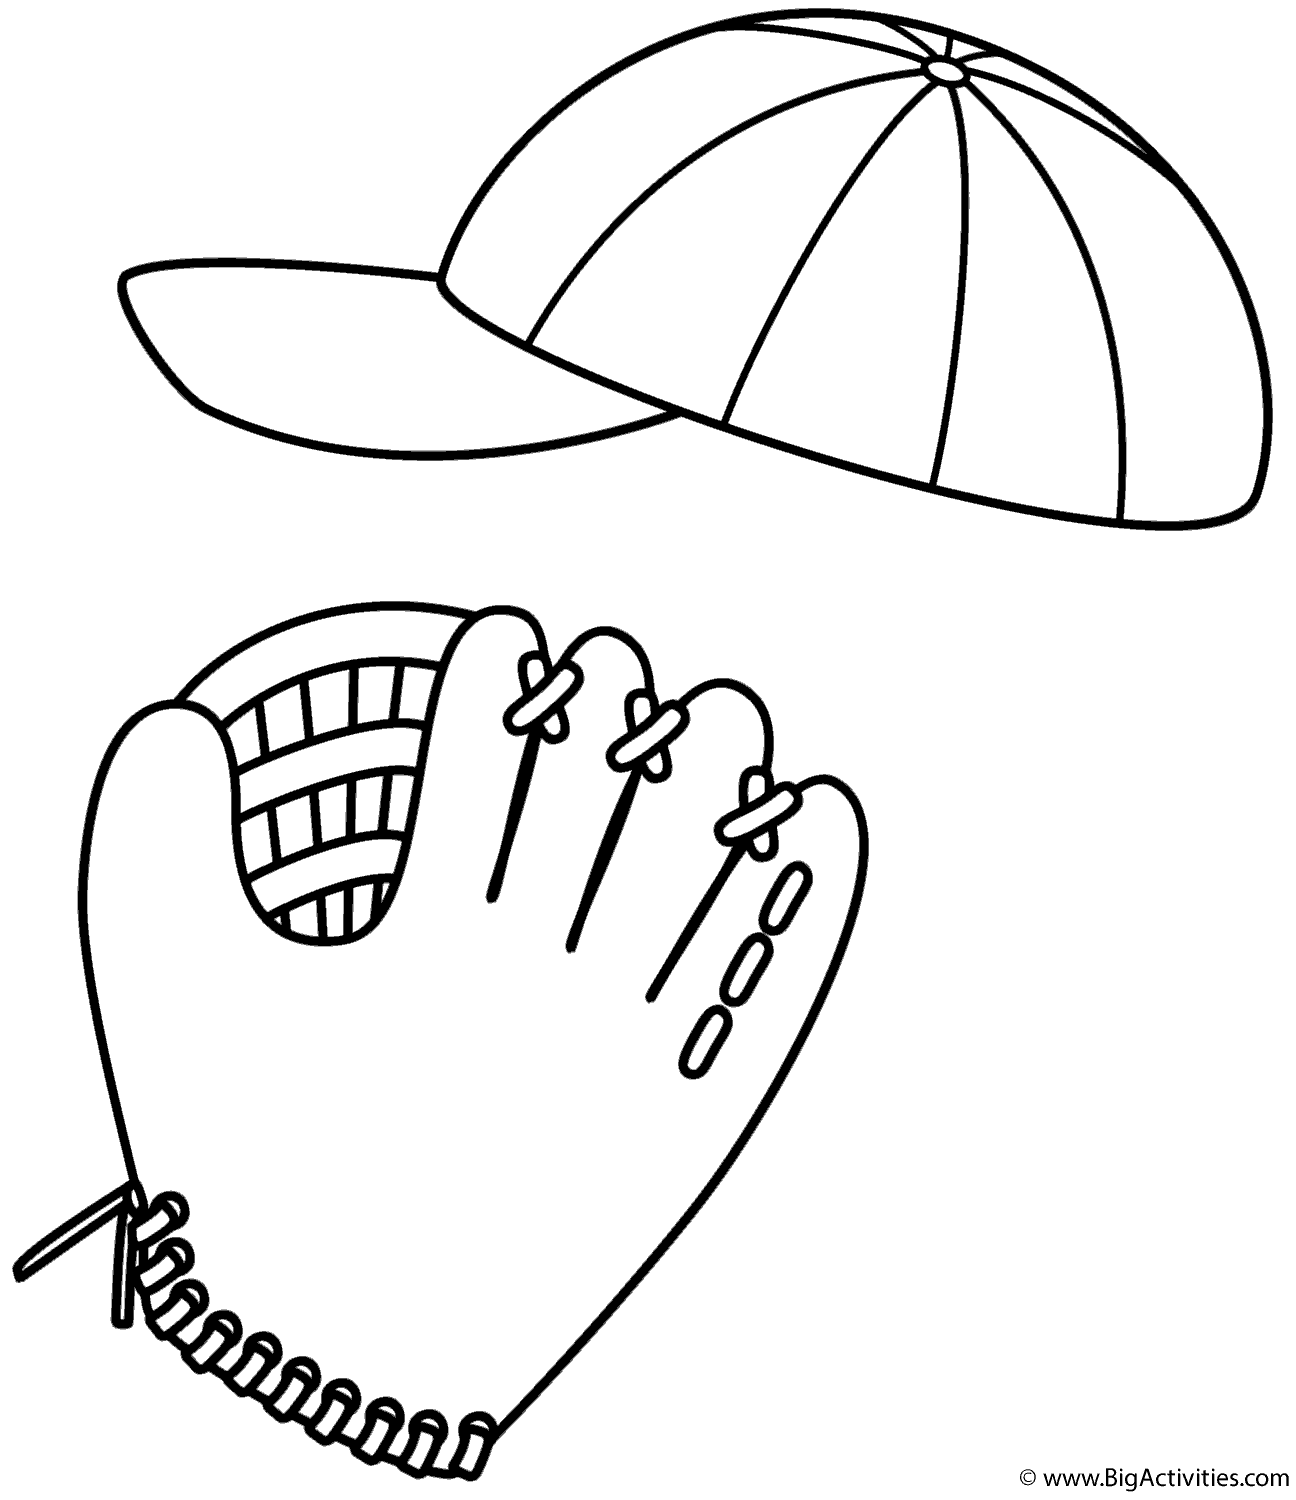 Baseball Cap and Glove - Coloring Page (Father's Day)